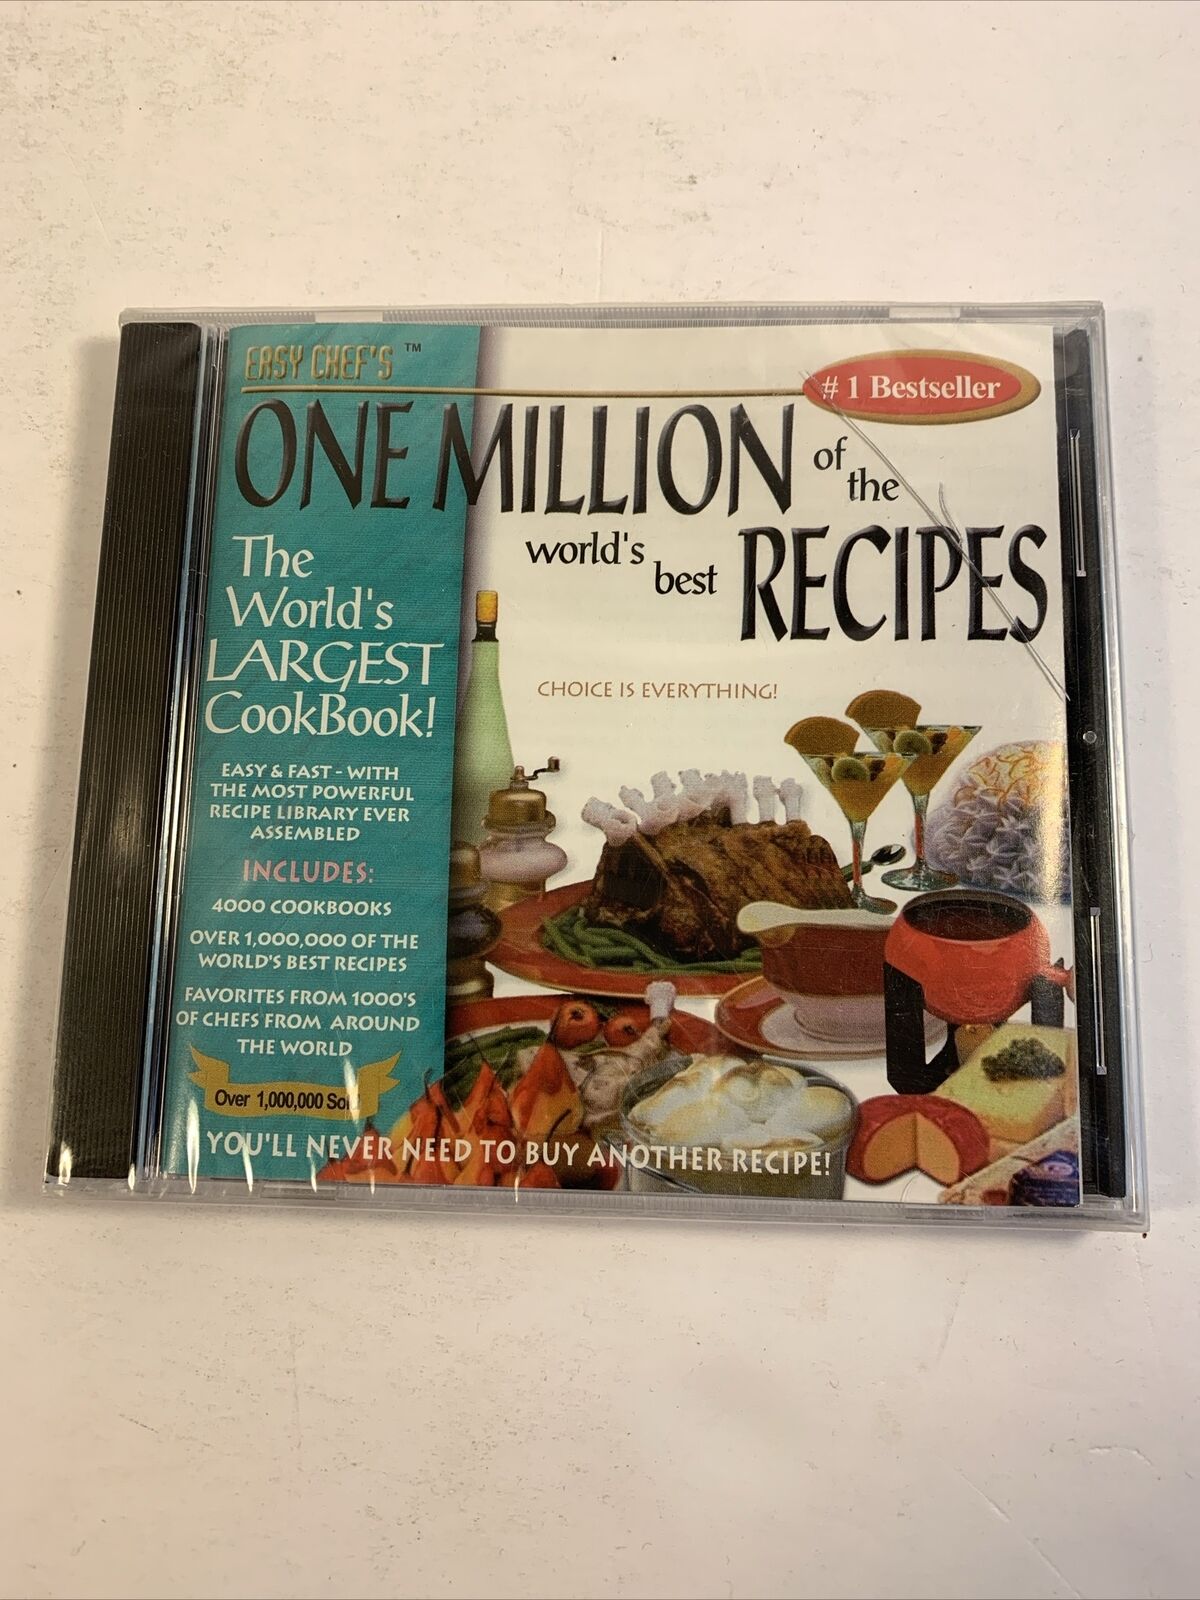 One Million of the World's best Recipes  PC CD-ROM by Easy Chef's for Win 3.1